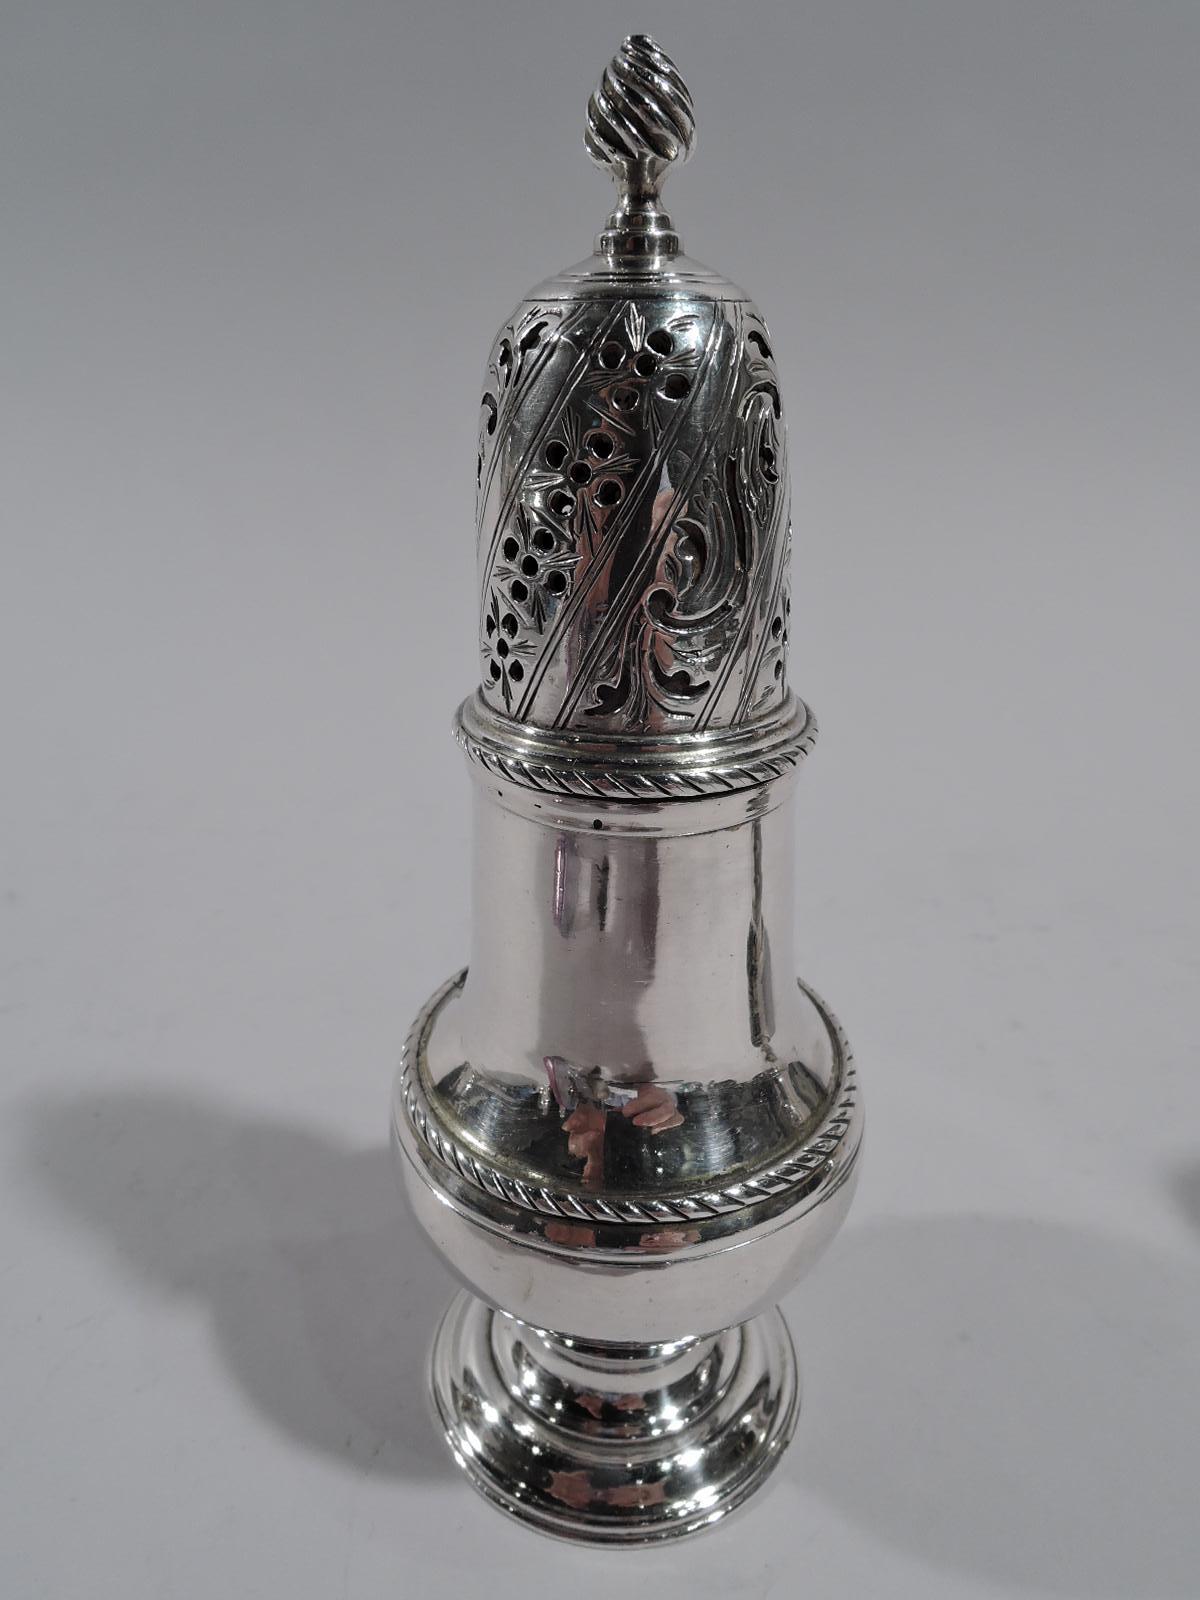 Pair of George III sterling silver condiment casters. Made by Robert Palmer in London in 1767. Baluster on raised foot. Cover has ornamental piercing and finial. Cabled borders. Fully marked. Total weight: 7 troy ounces.